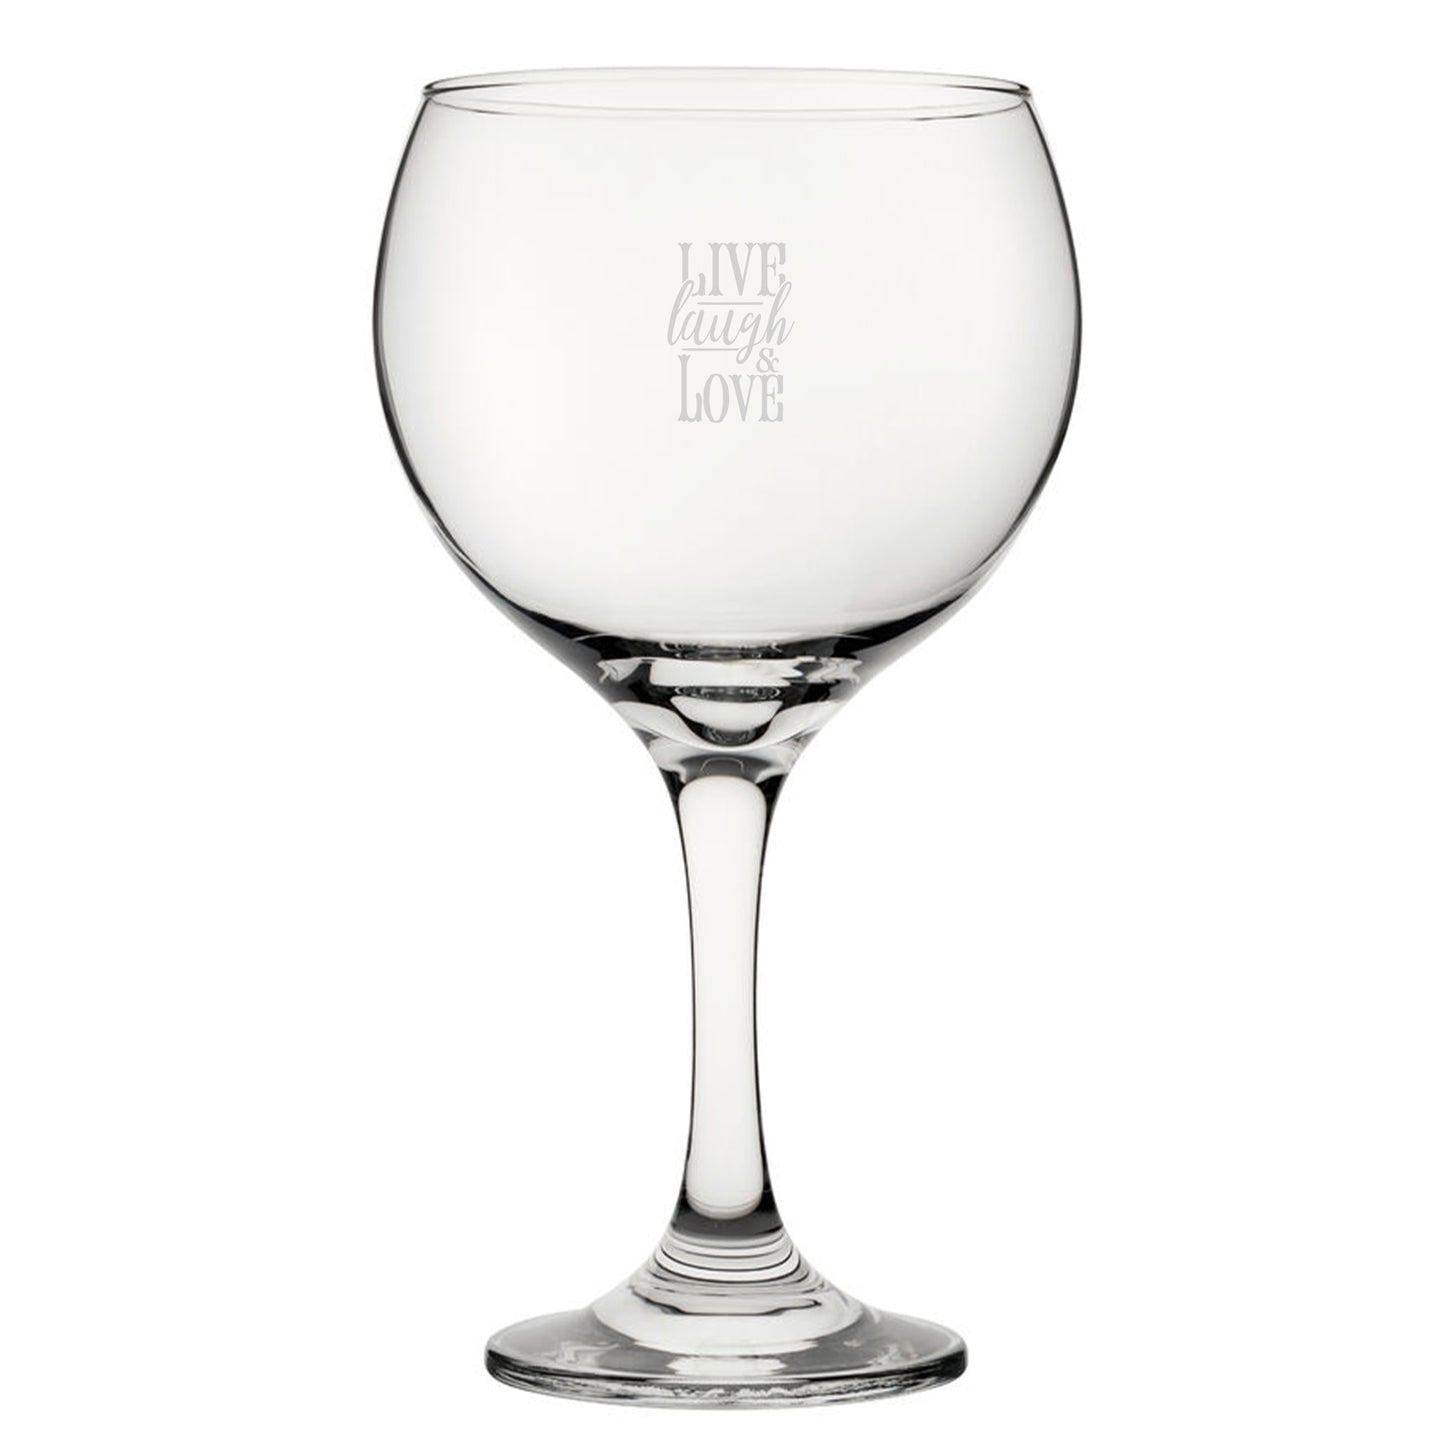 Live Laugh Love - Engraved Novelty Gin Balloon Cocktail Glass Image 1